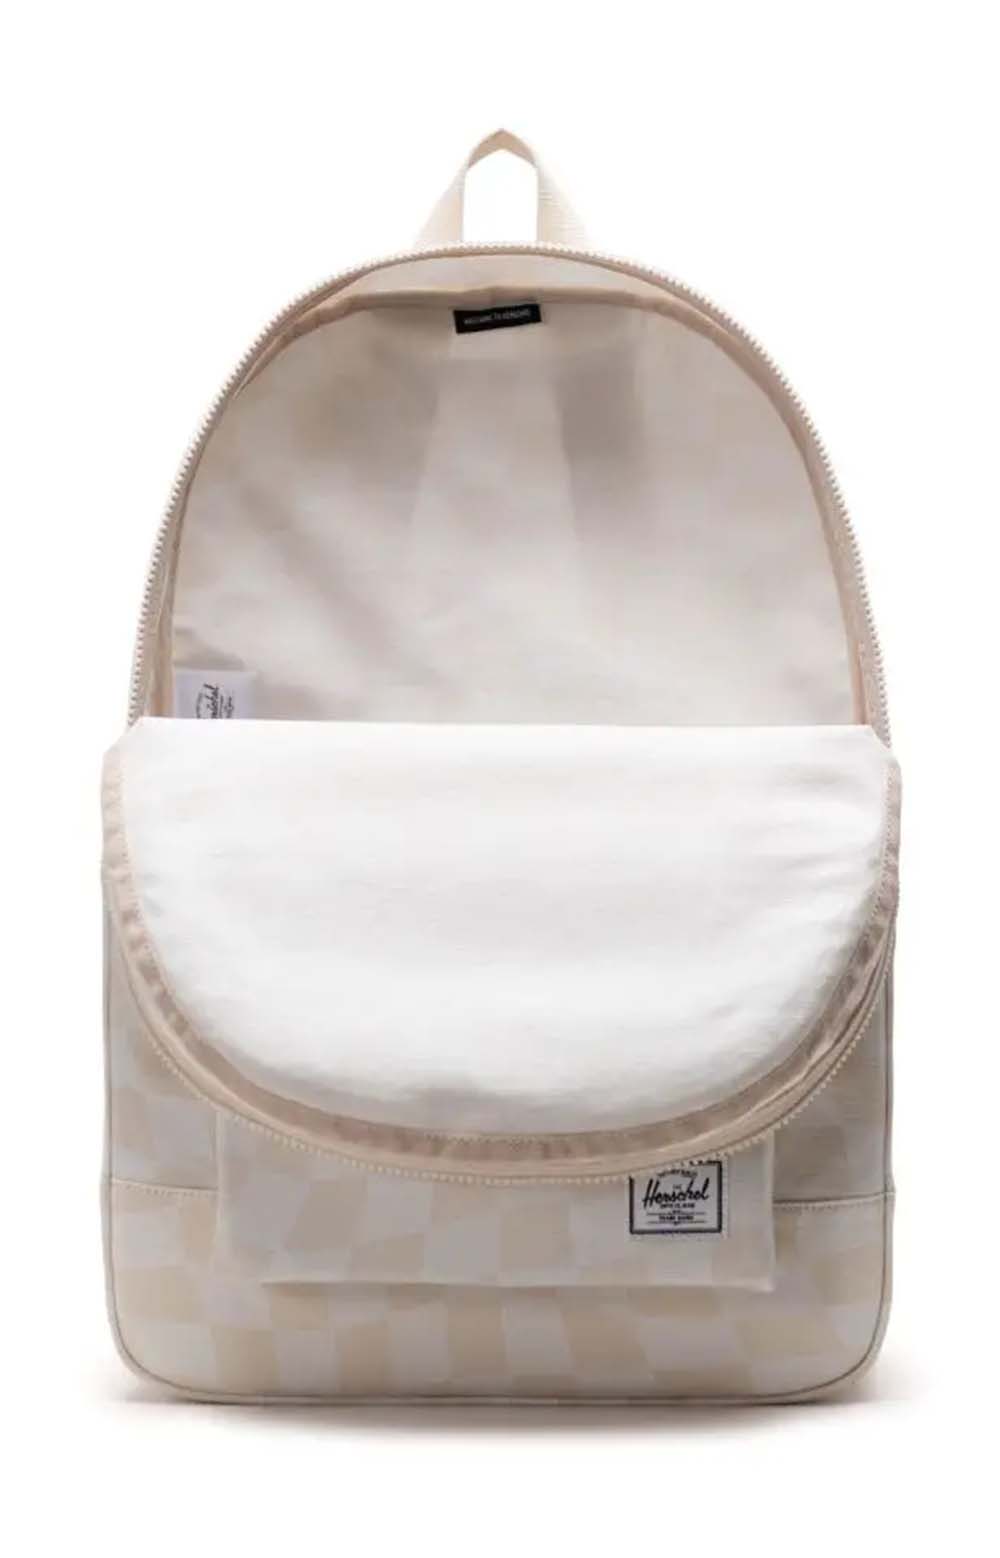 Daypack Backpack - Groovy Check Natural/White